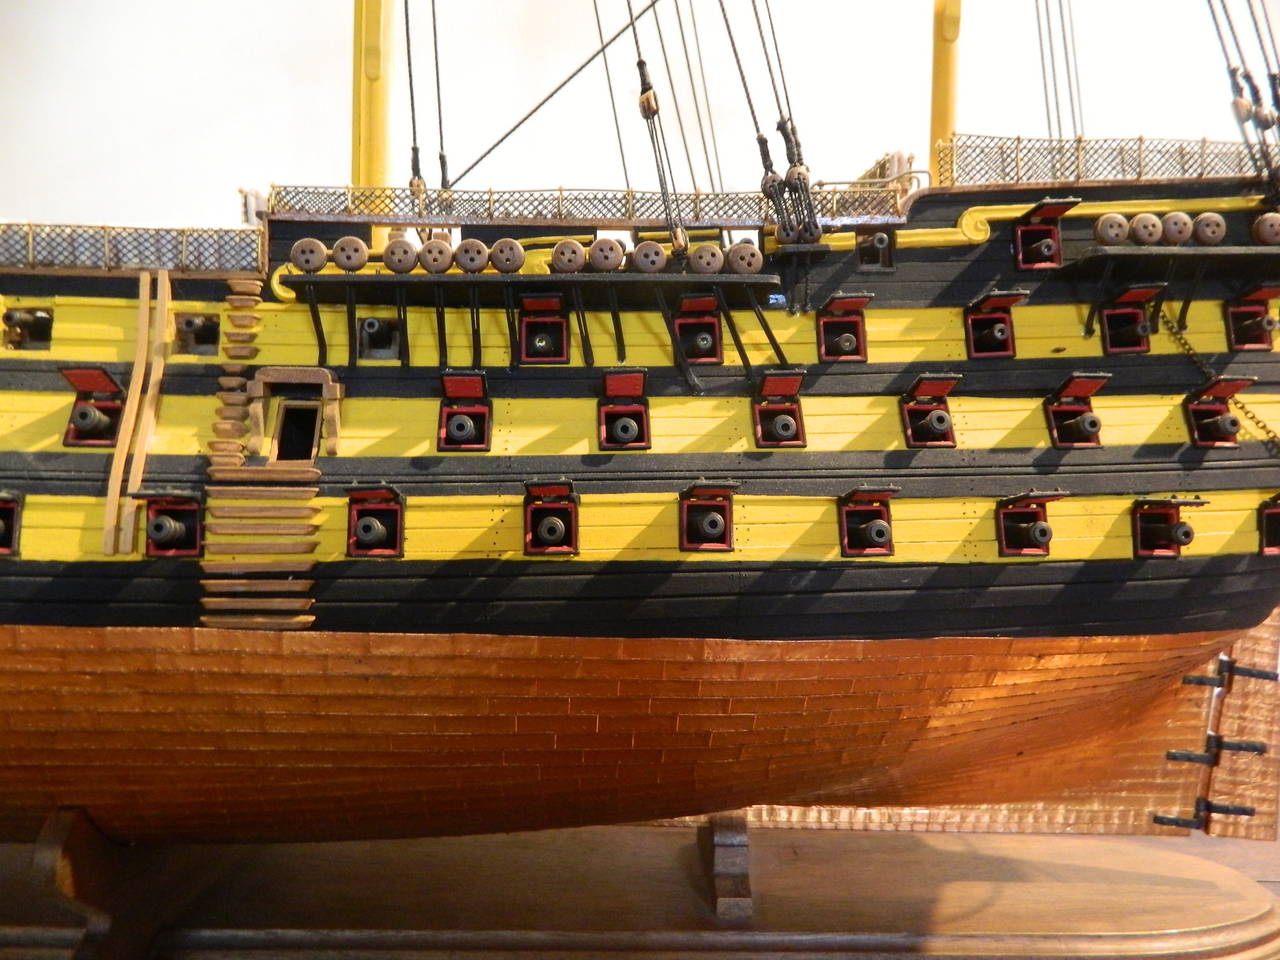 Ship Model of the HMS Victory -1758, England.  HMS Victory is a 104-gun first-rate ship of the line of the Royal Navy, ordered in 1758, laid down in 1759 and launched in 1765. She is best known as Lord Nelson's flagship at the Battle of Trafalgar in